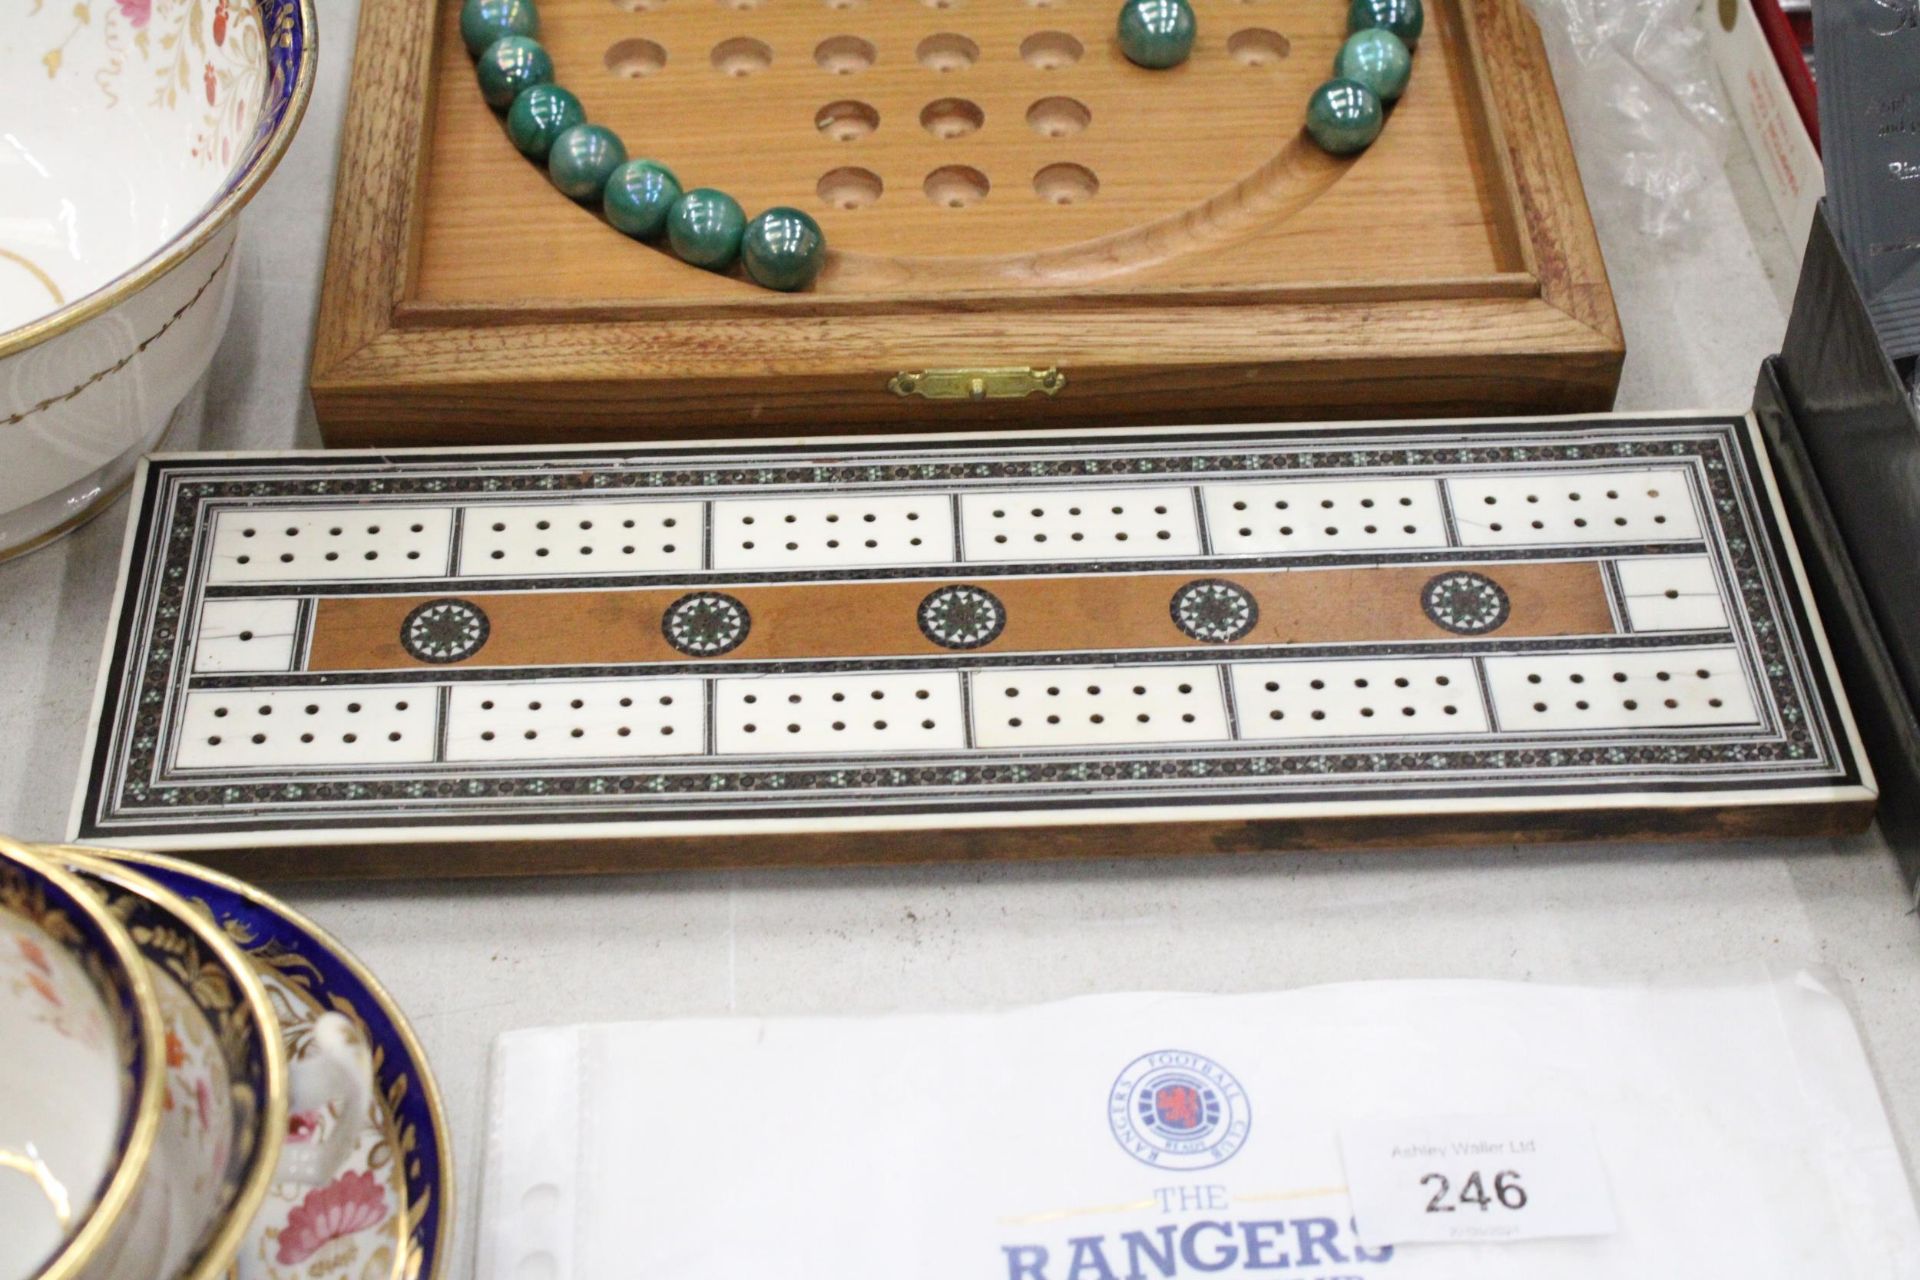 A BOXED WOODEN SOLITAIRE BOARD WITH MARBLES PLUS A VINTAGE CRIBBAGE BOARD - Image 4 of 5